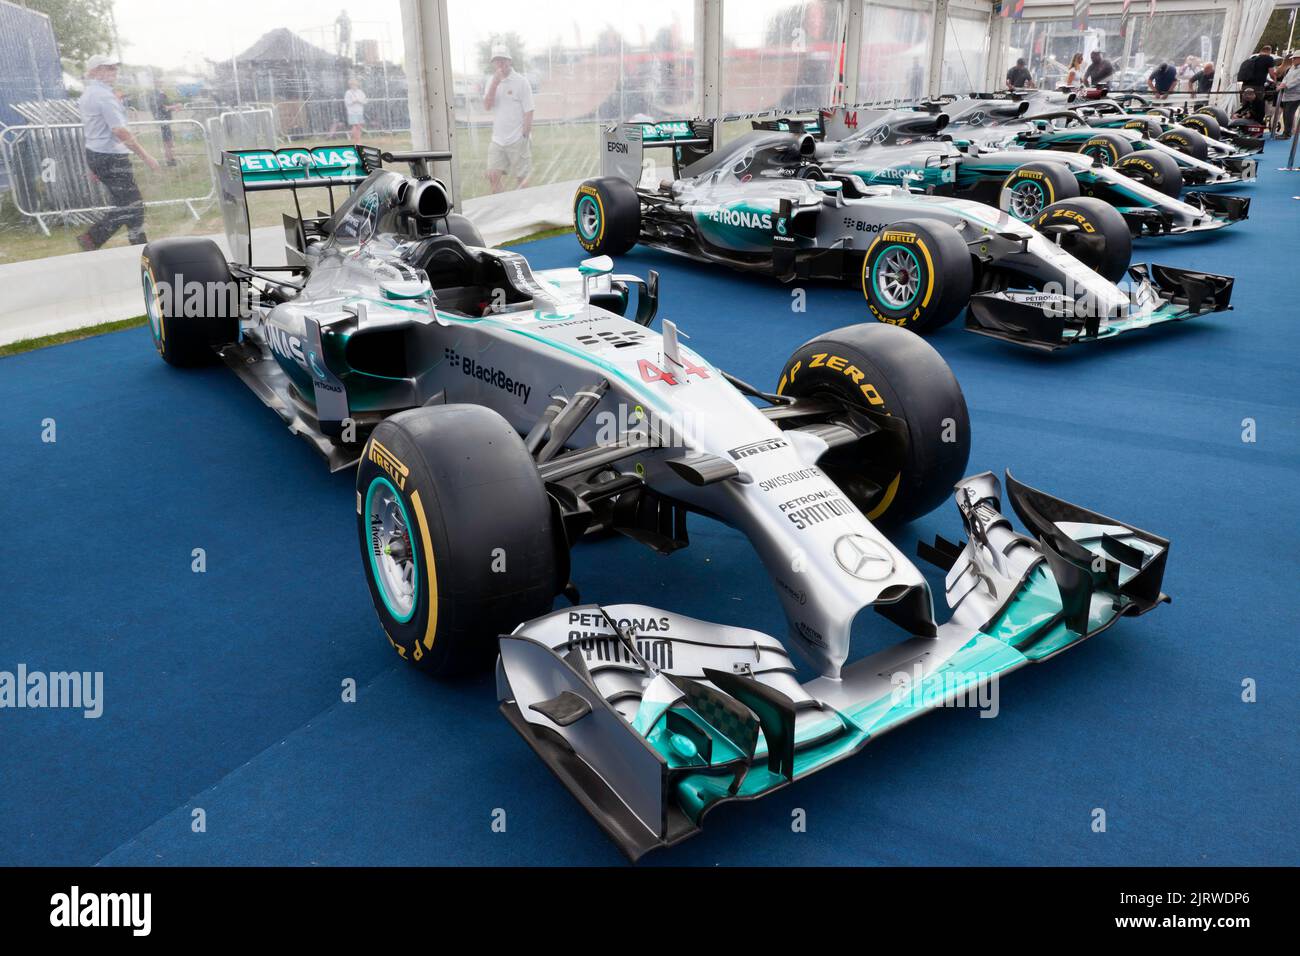 Silverstone Circuit, Silverstone, Nr, Towcester, 26th August, 2022. A special tribute to Sir Lewis Hamilton, all seven of his World Championship winning Formula One cars on display at thge Si;lverstone Classic Credit: John Gaffen/Alamy Live News Stock Photo